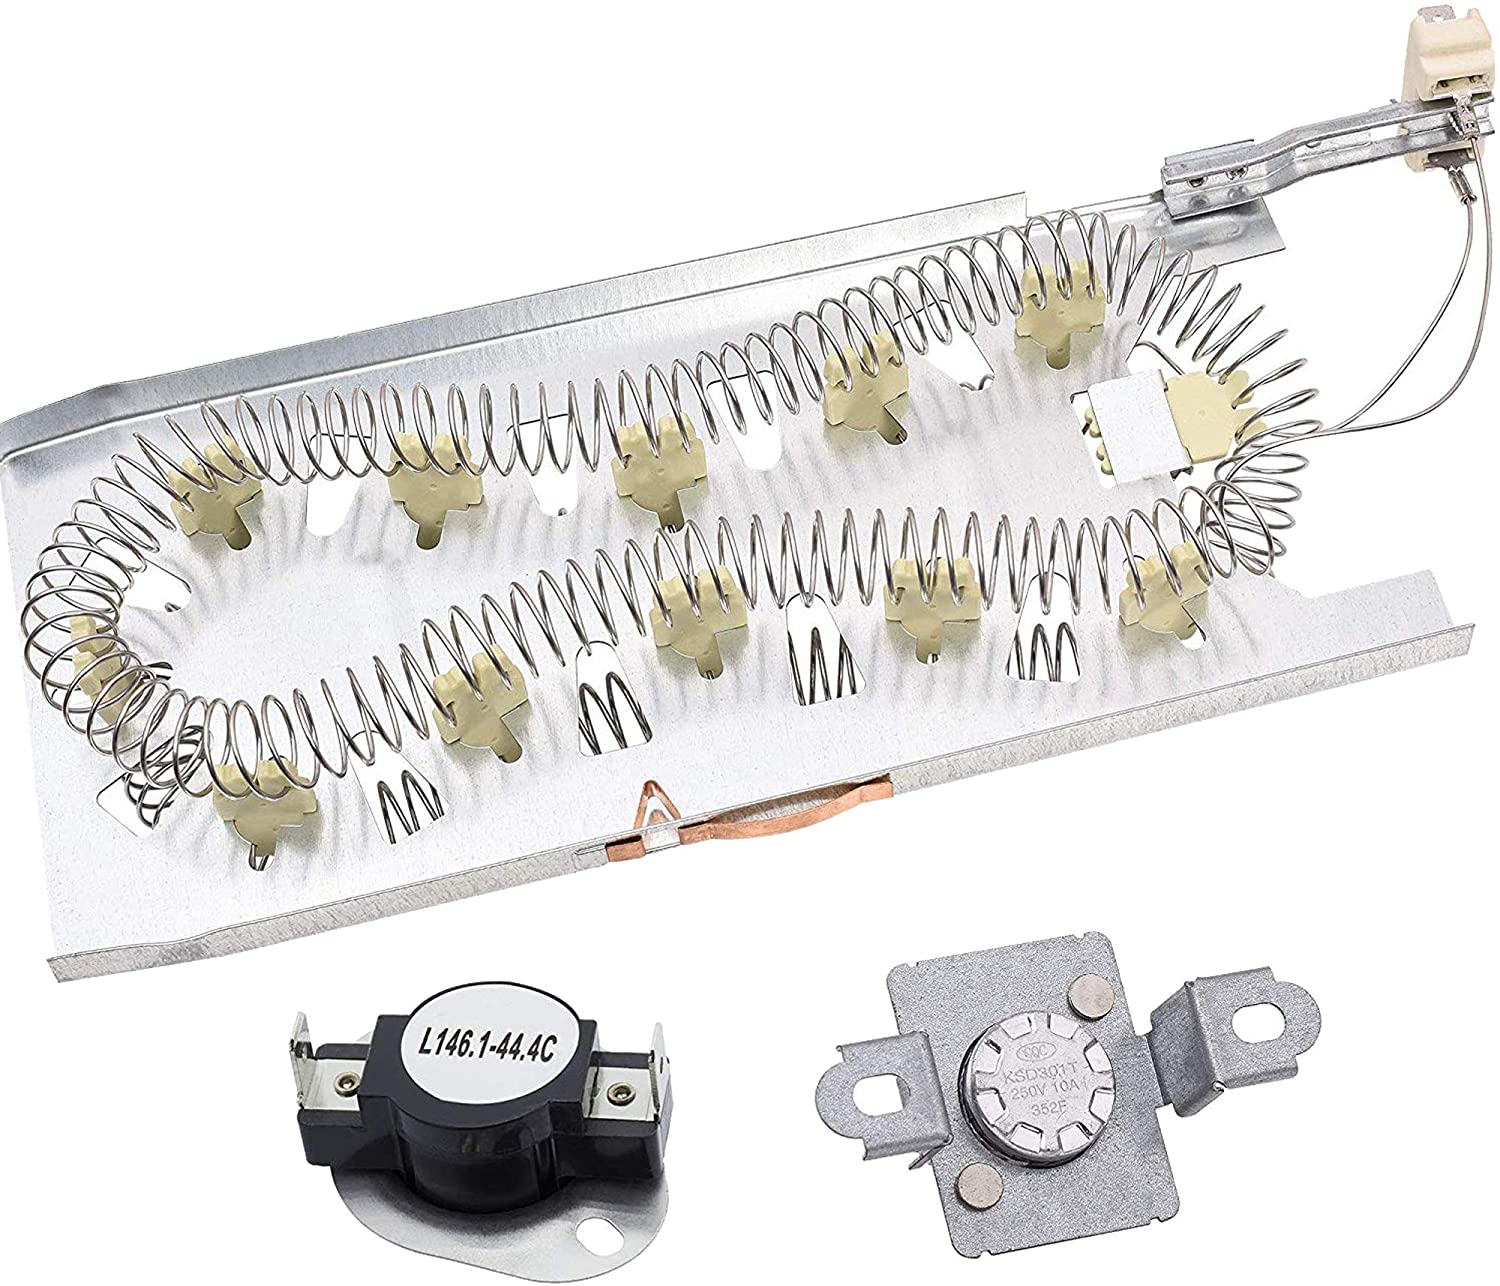 3387747 & 279973 Dryer Heating Element With Dryer Thermal Cut-off Fuse Kit.  (LNC)